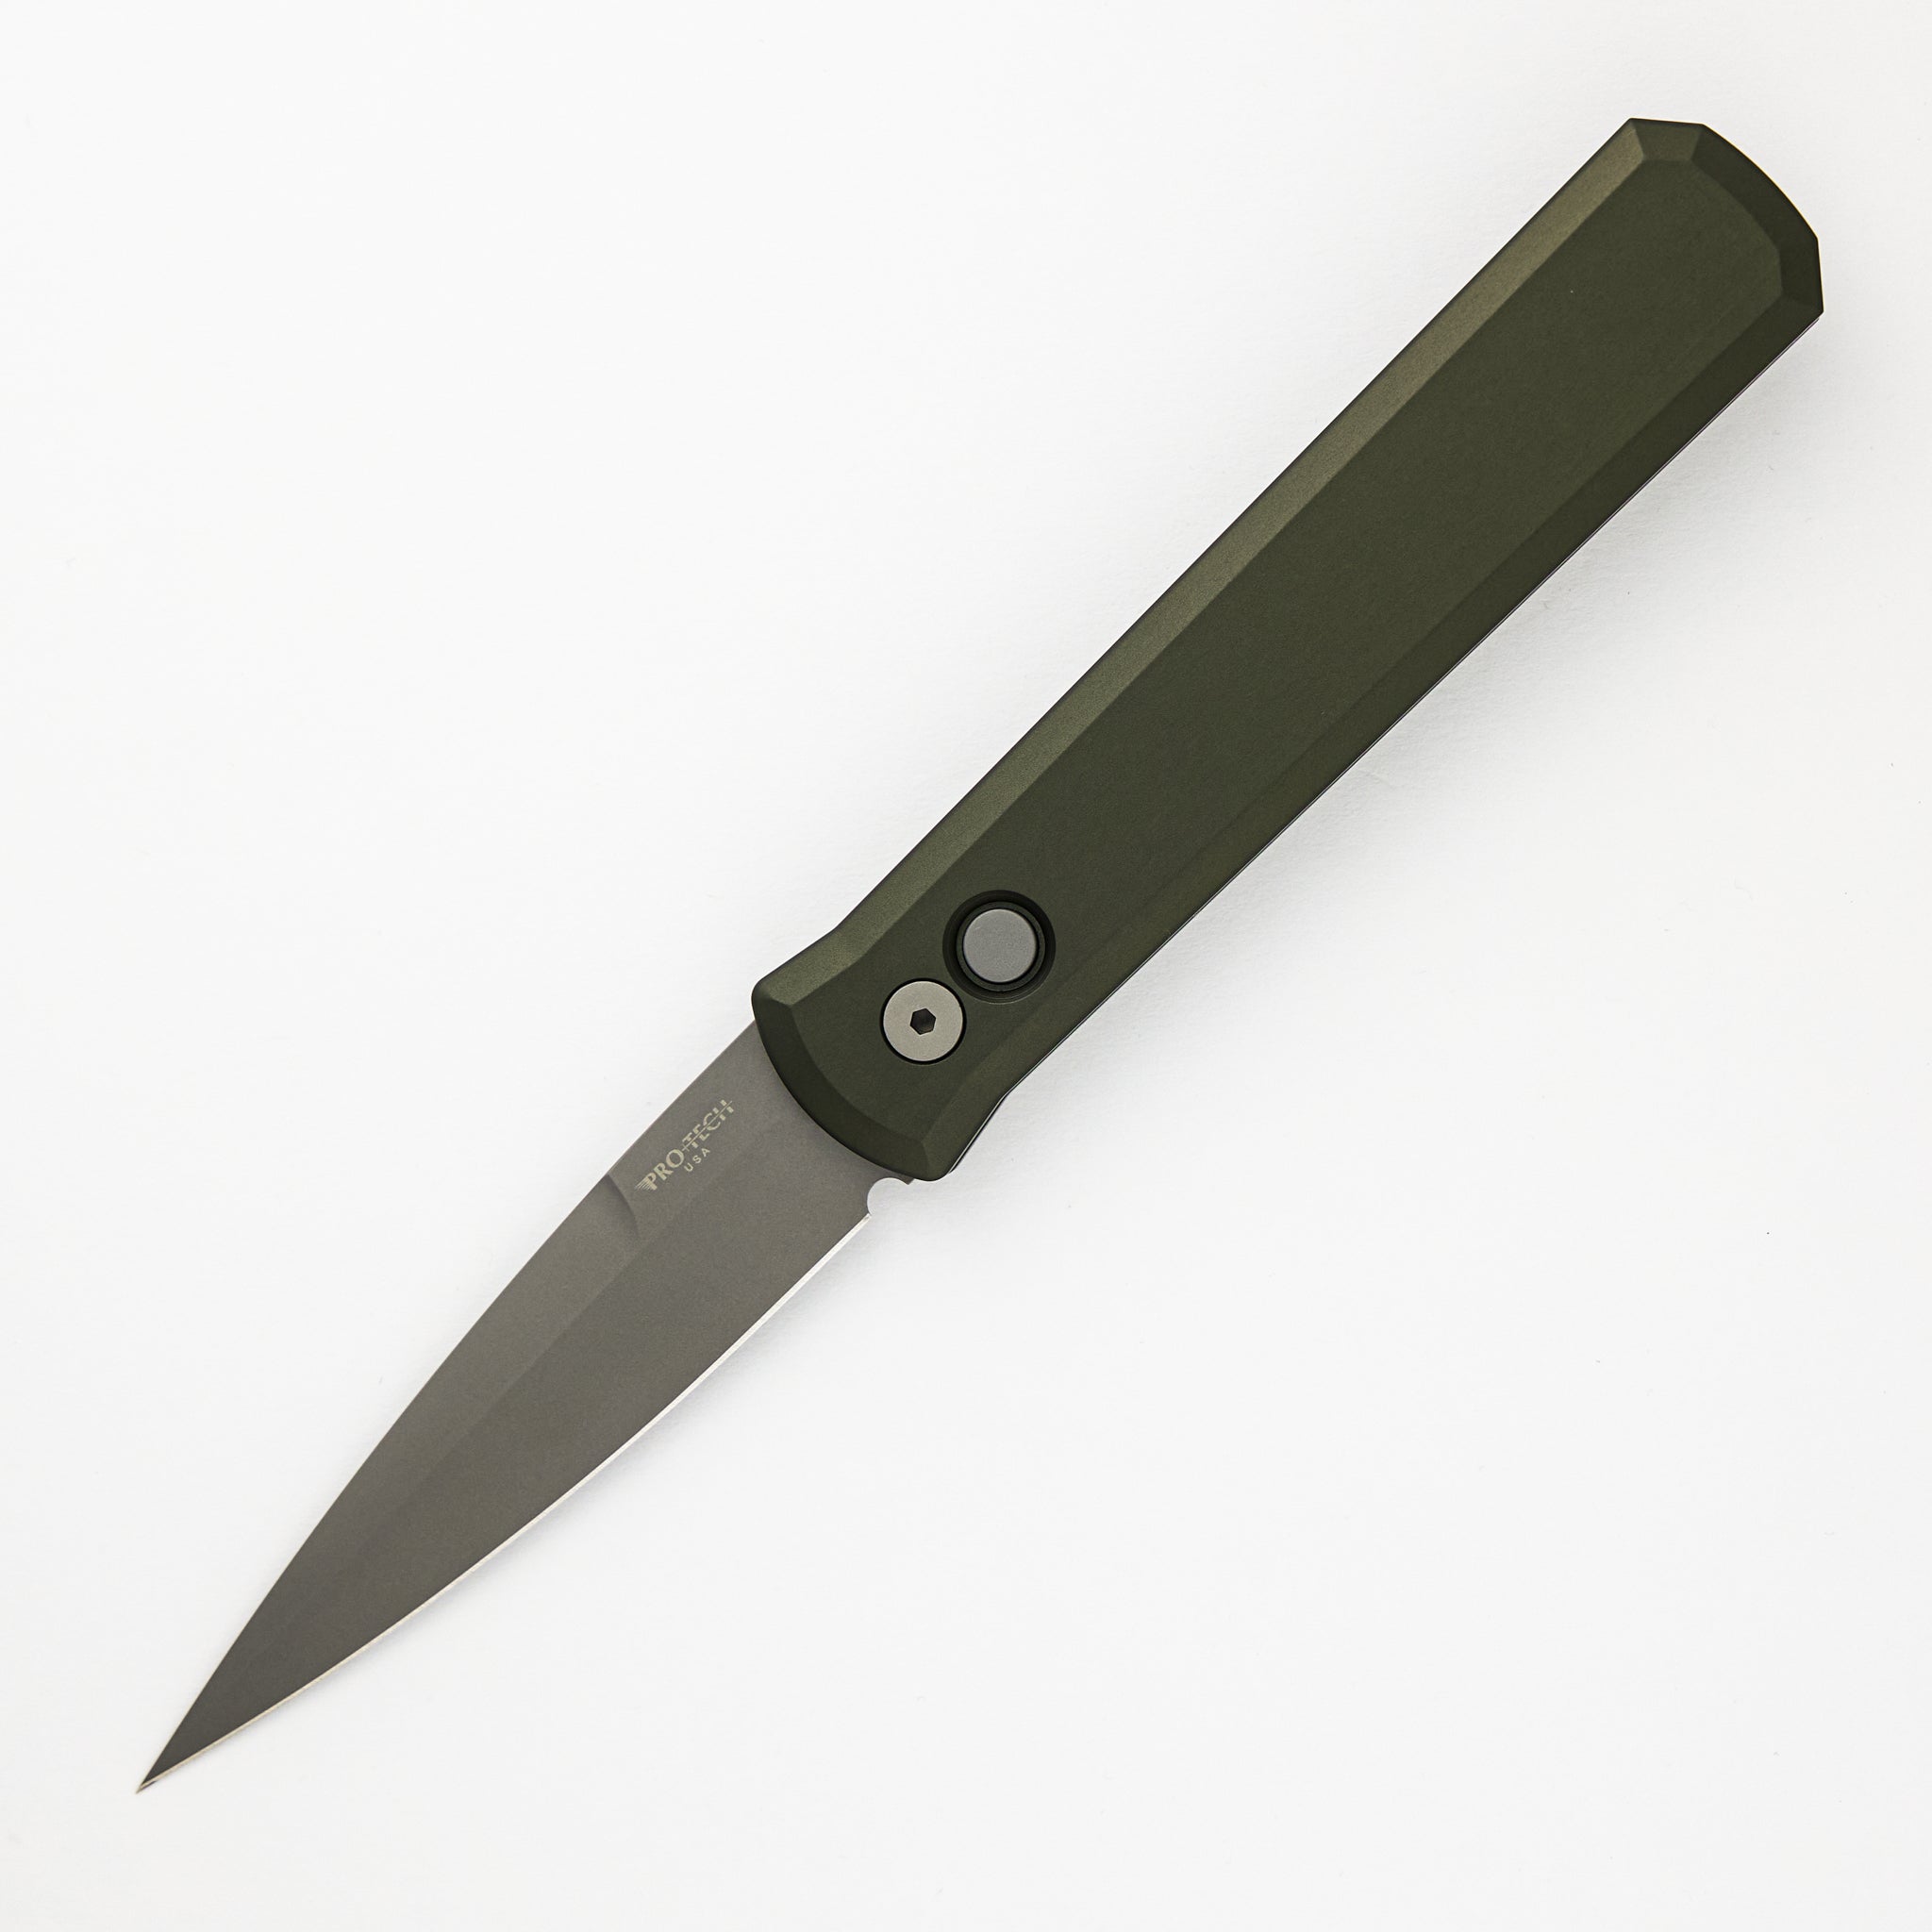 Pro-Tech Knives GODFATHER – Solid Green Handle – Blasted 154CM Plain Edge Blade 920-Green